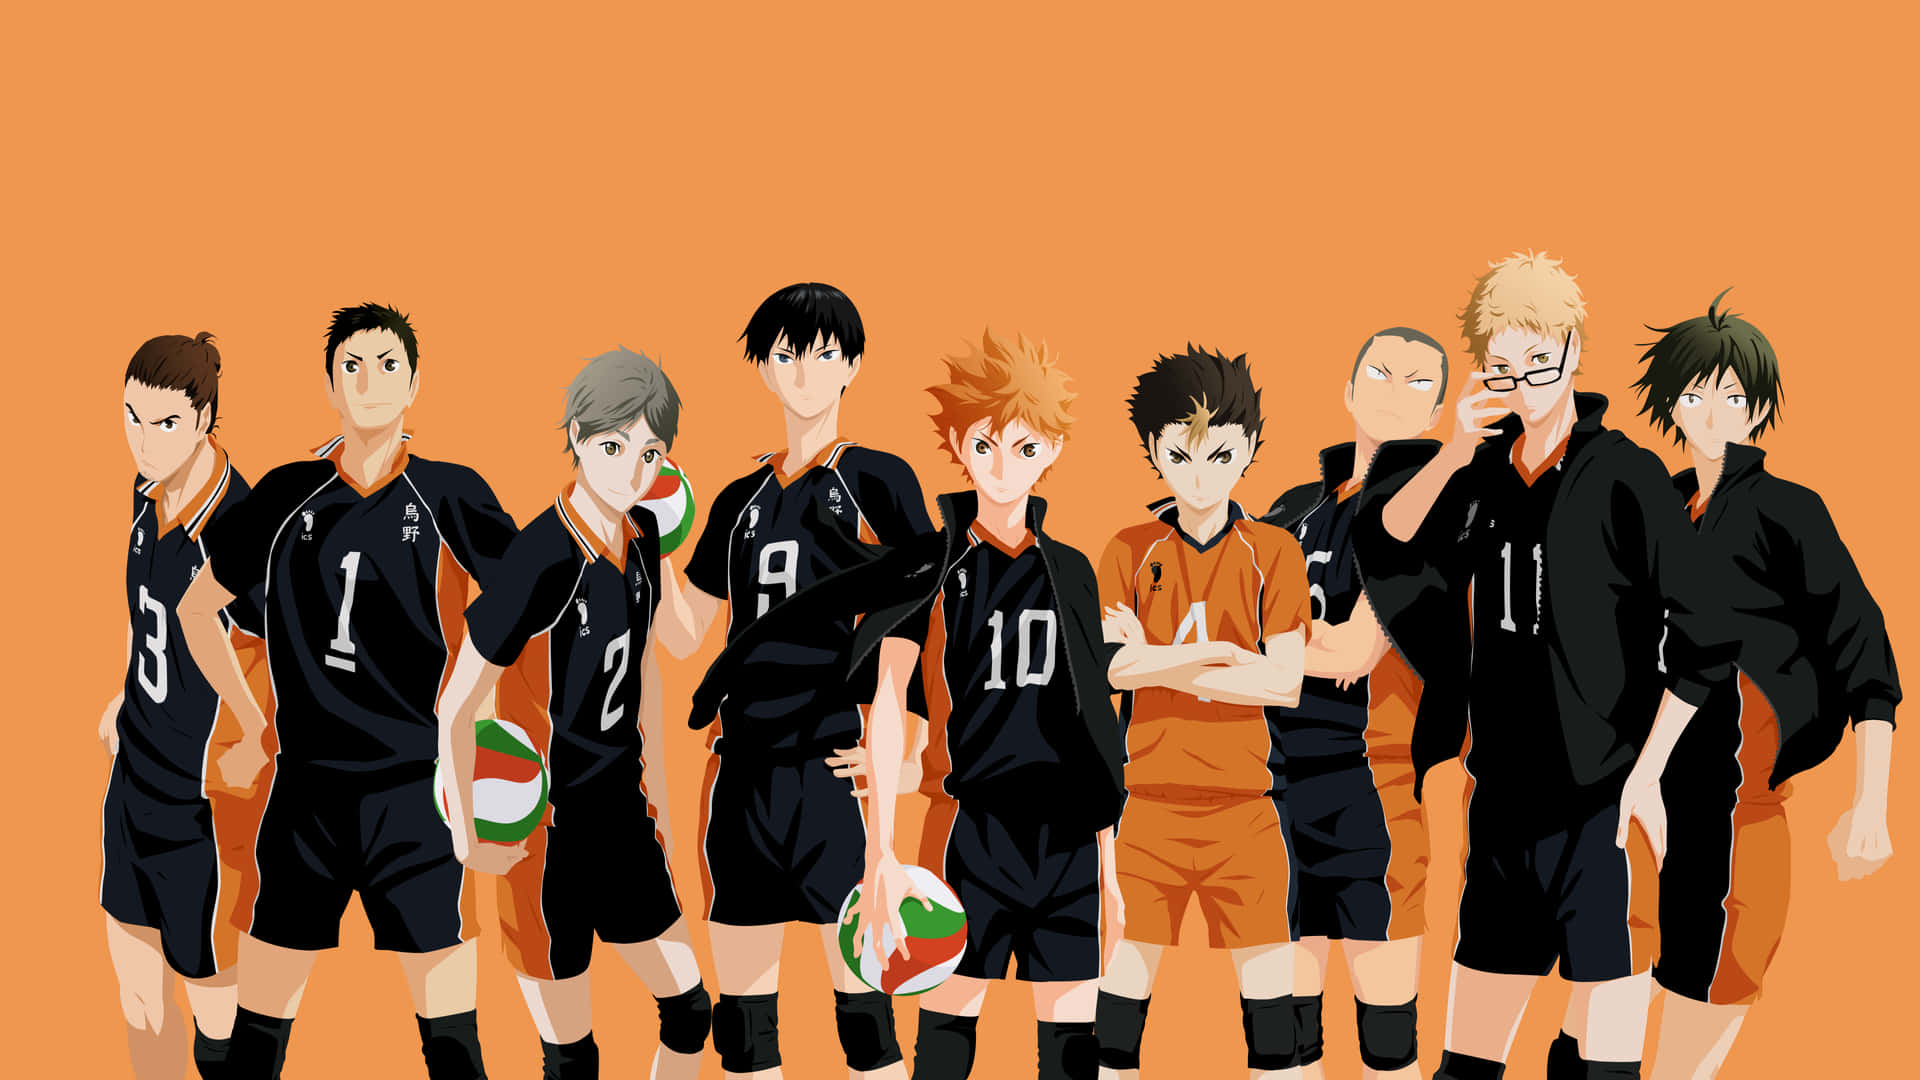 Nekoma High School's Volleyball Team - Ready for Victory Wallpaper